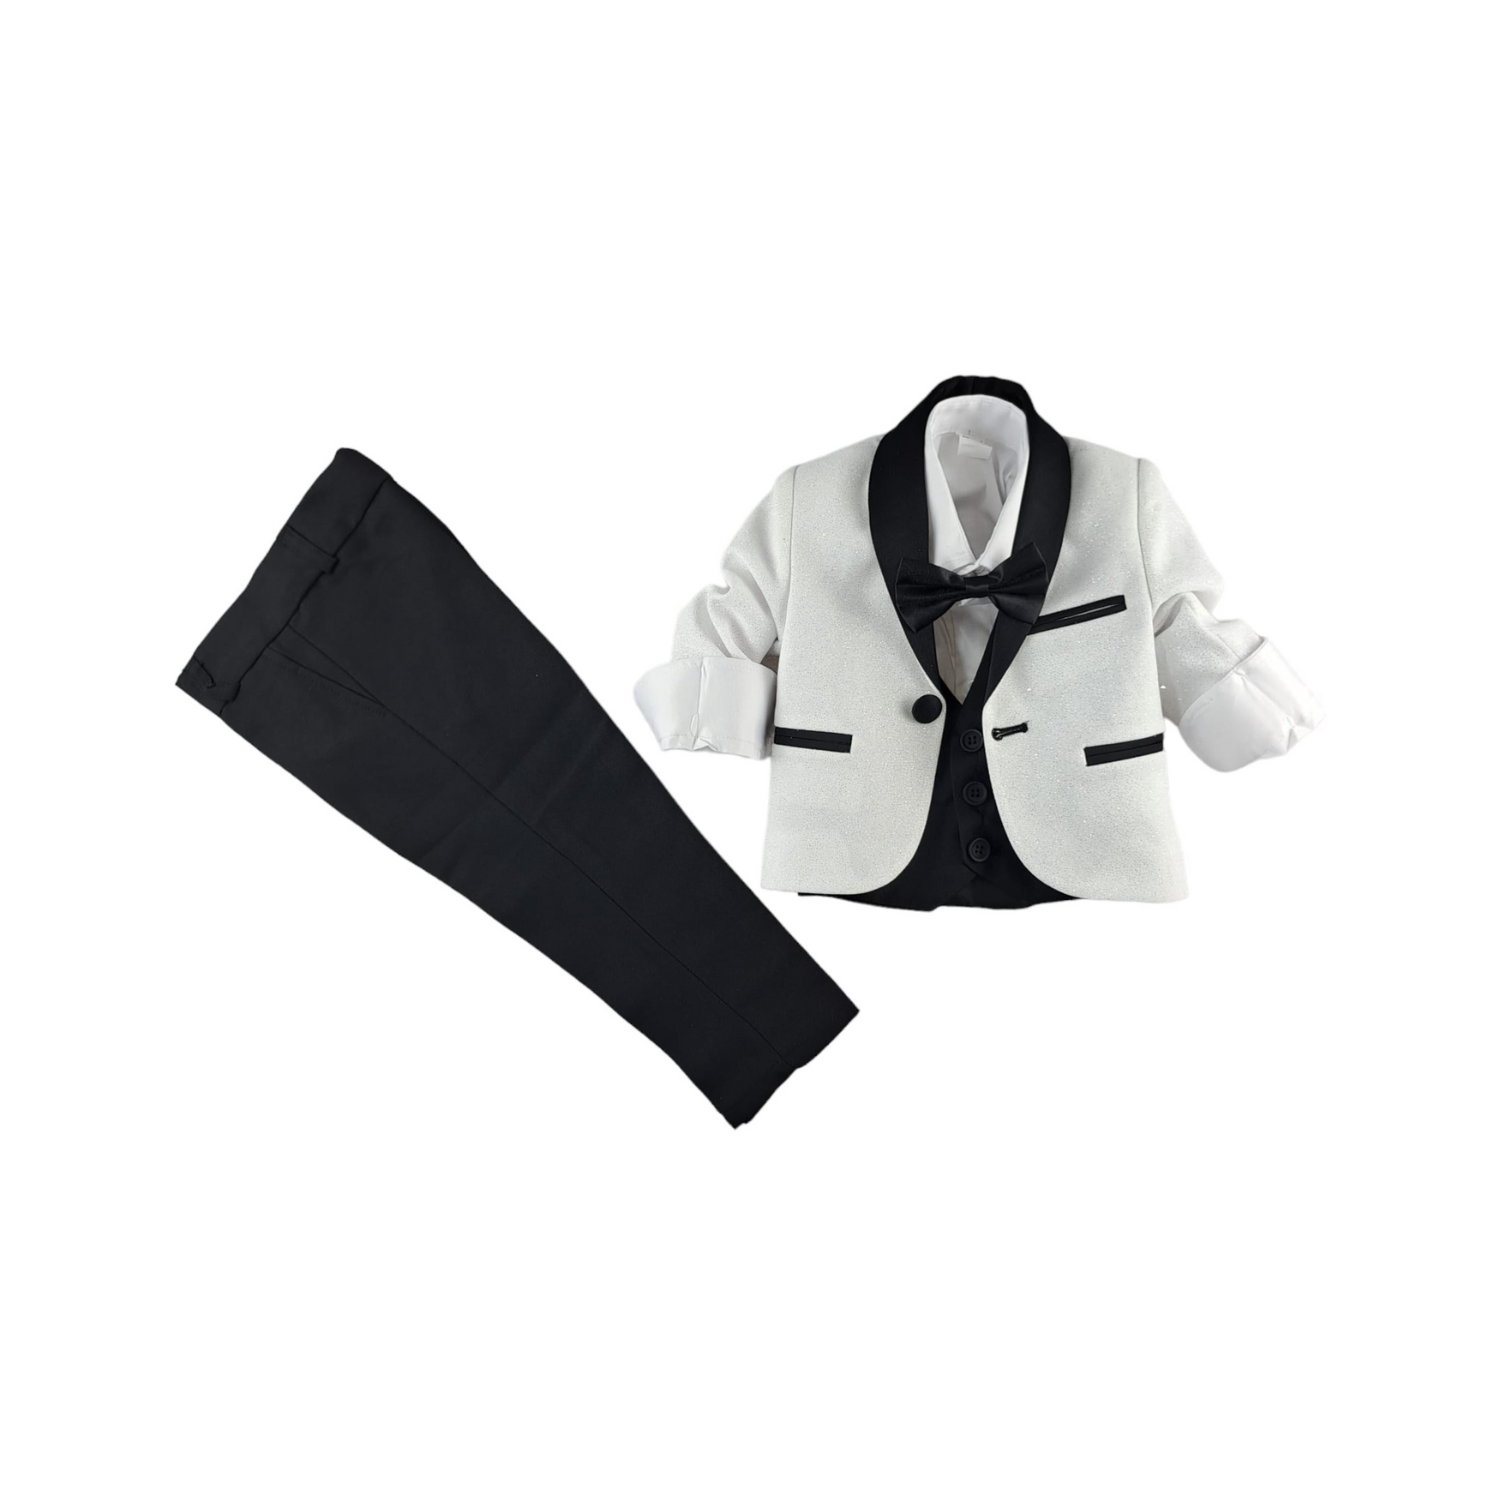 The Baby Ceremony Formal Boys Suit